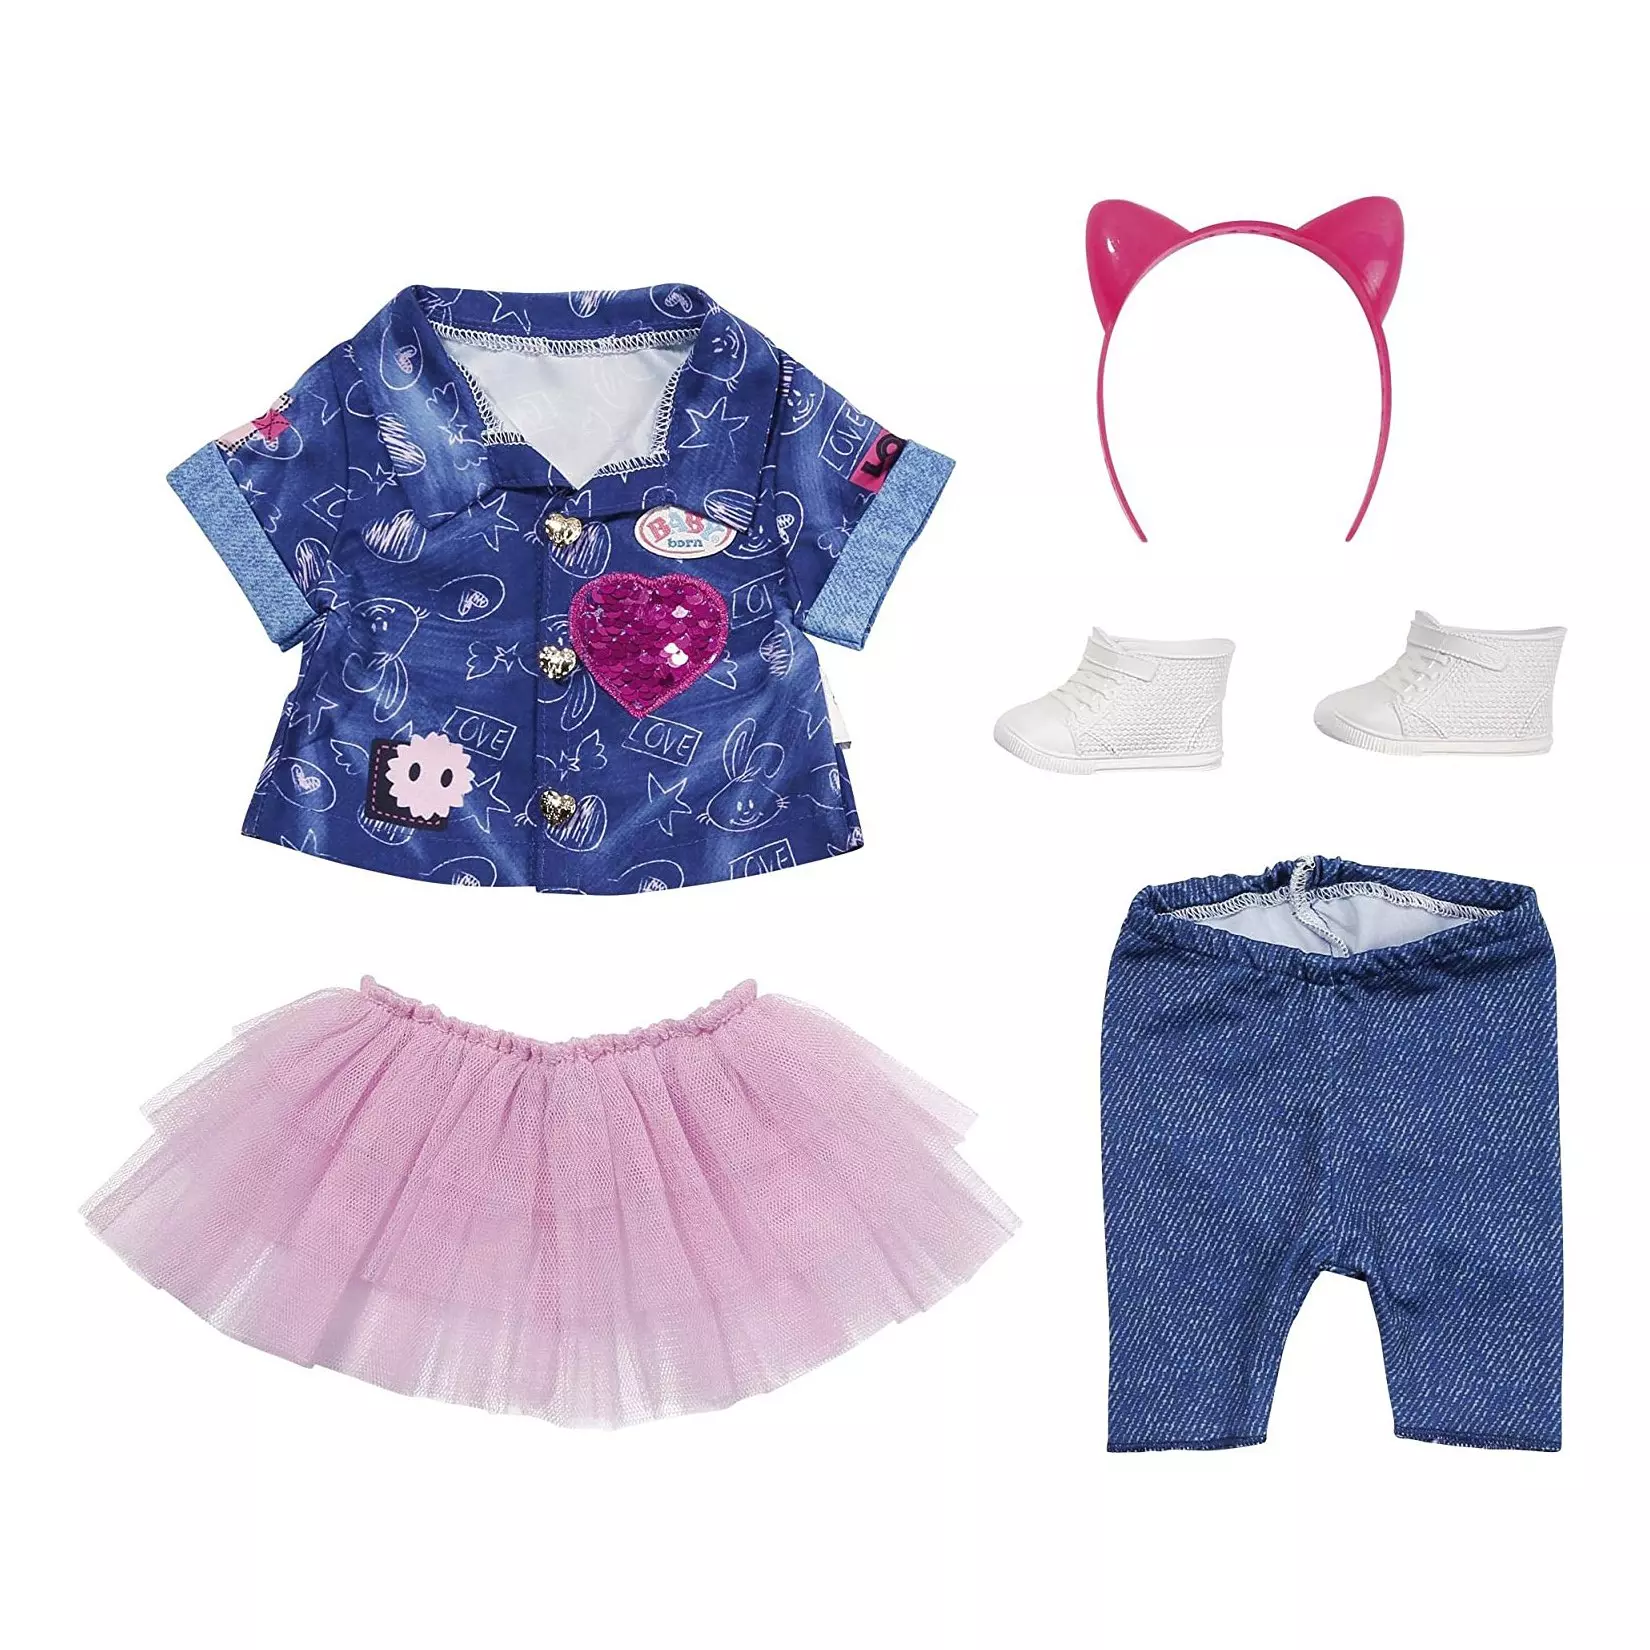 Baby Born Deluxe Jeans Dress Set